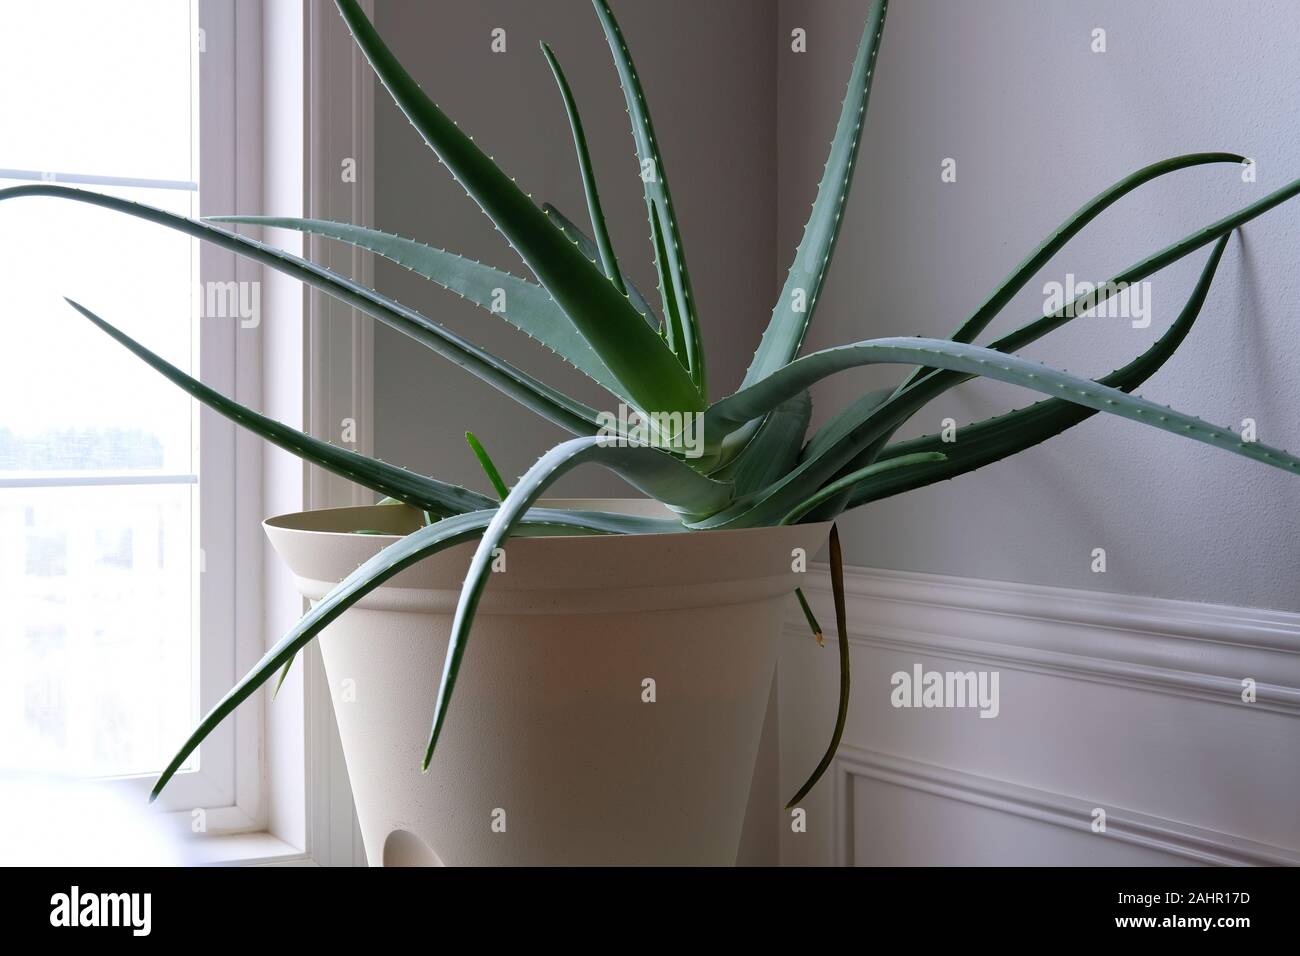 Large Potted Aloe Vera Plant In A White Plastic Pot Inside A Home